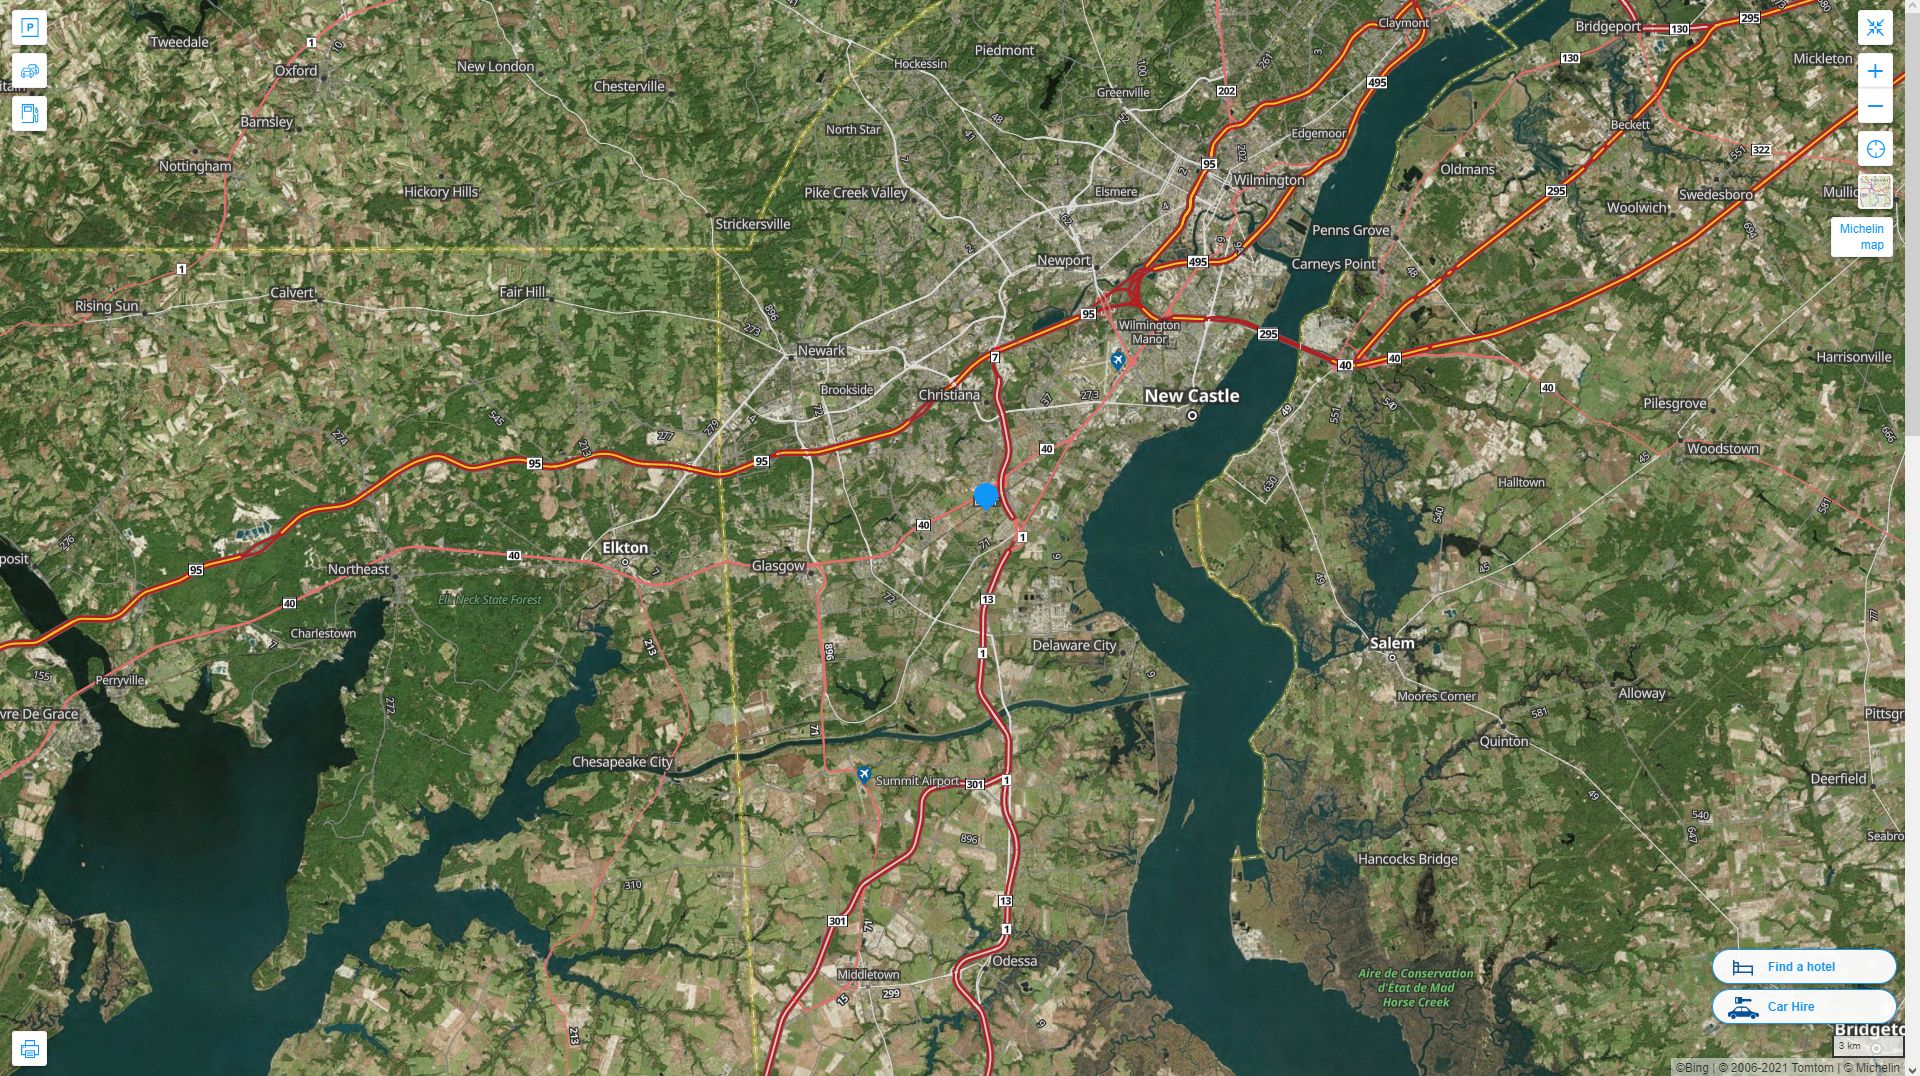 Bear Delaware Highway and Road Map with Satellite View